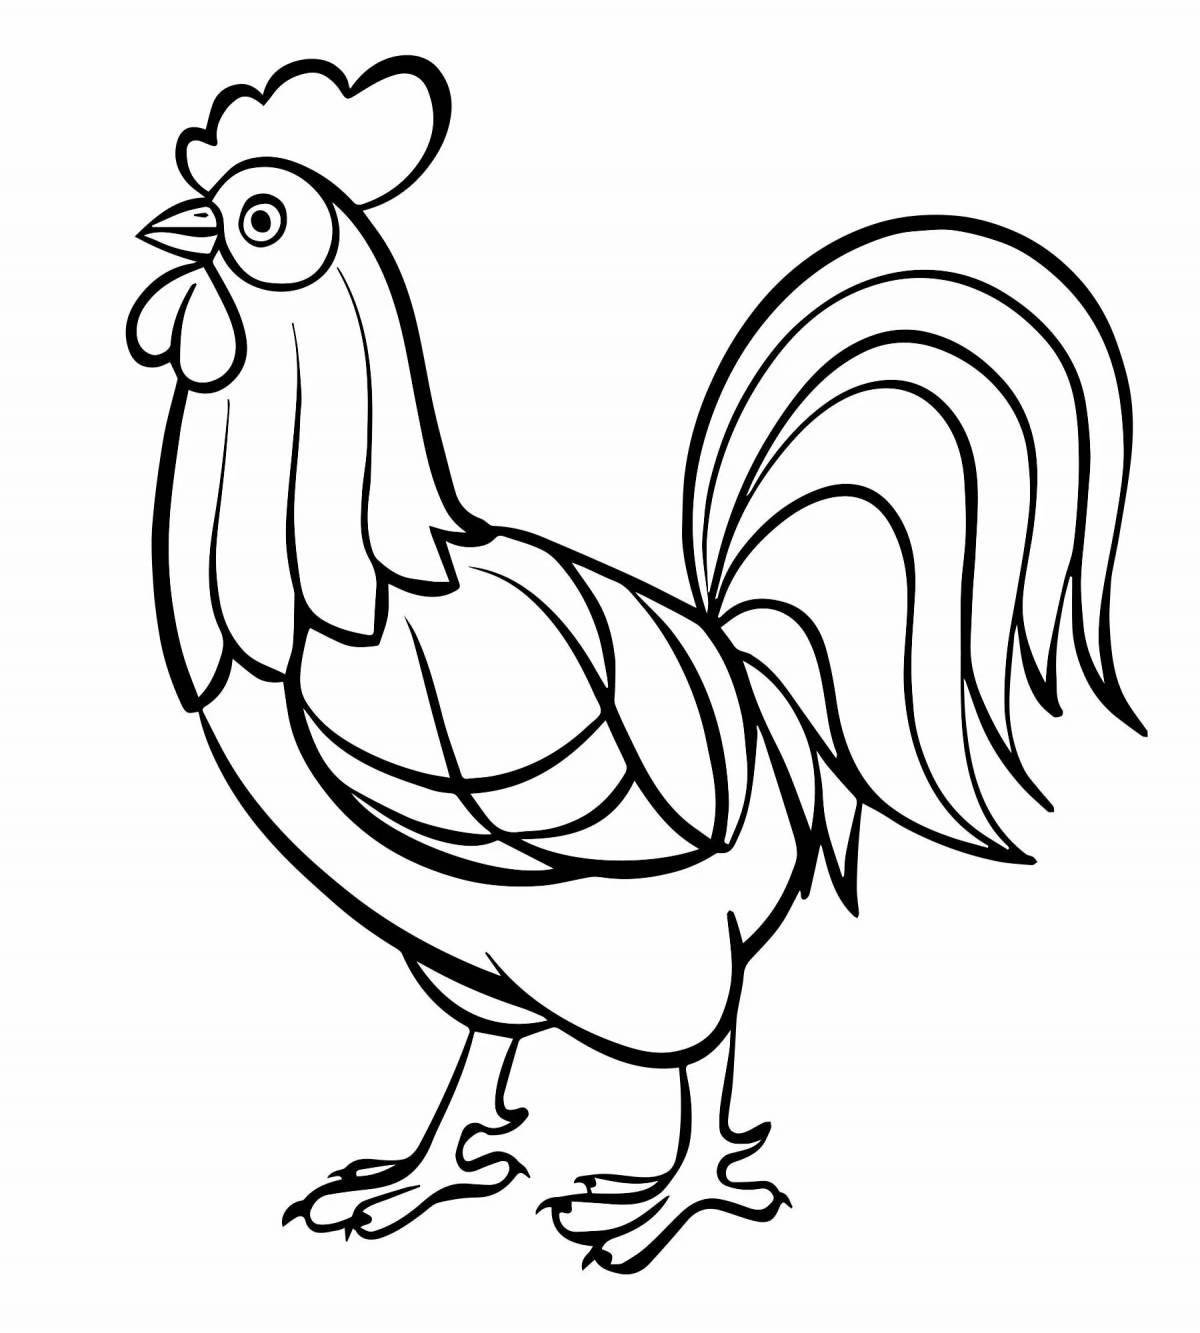 Wonderful rooster coloring for children 3-4 years old